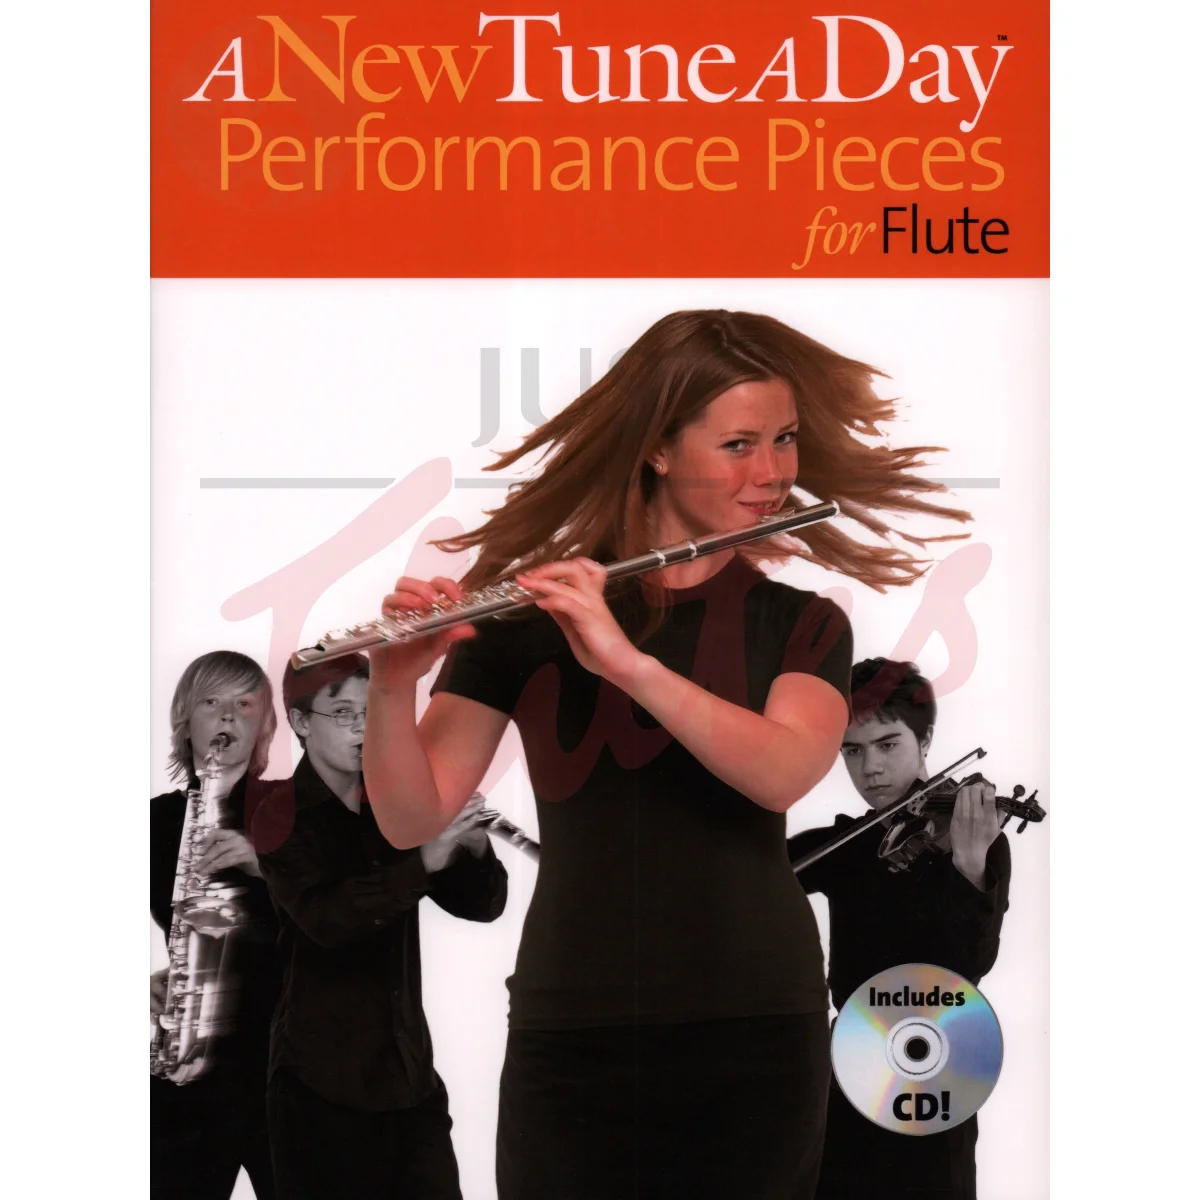 A New Tune A Day for Flute: Performance Pieces